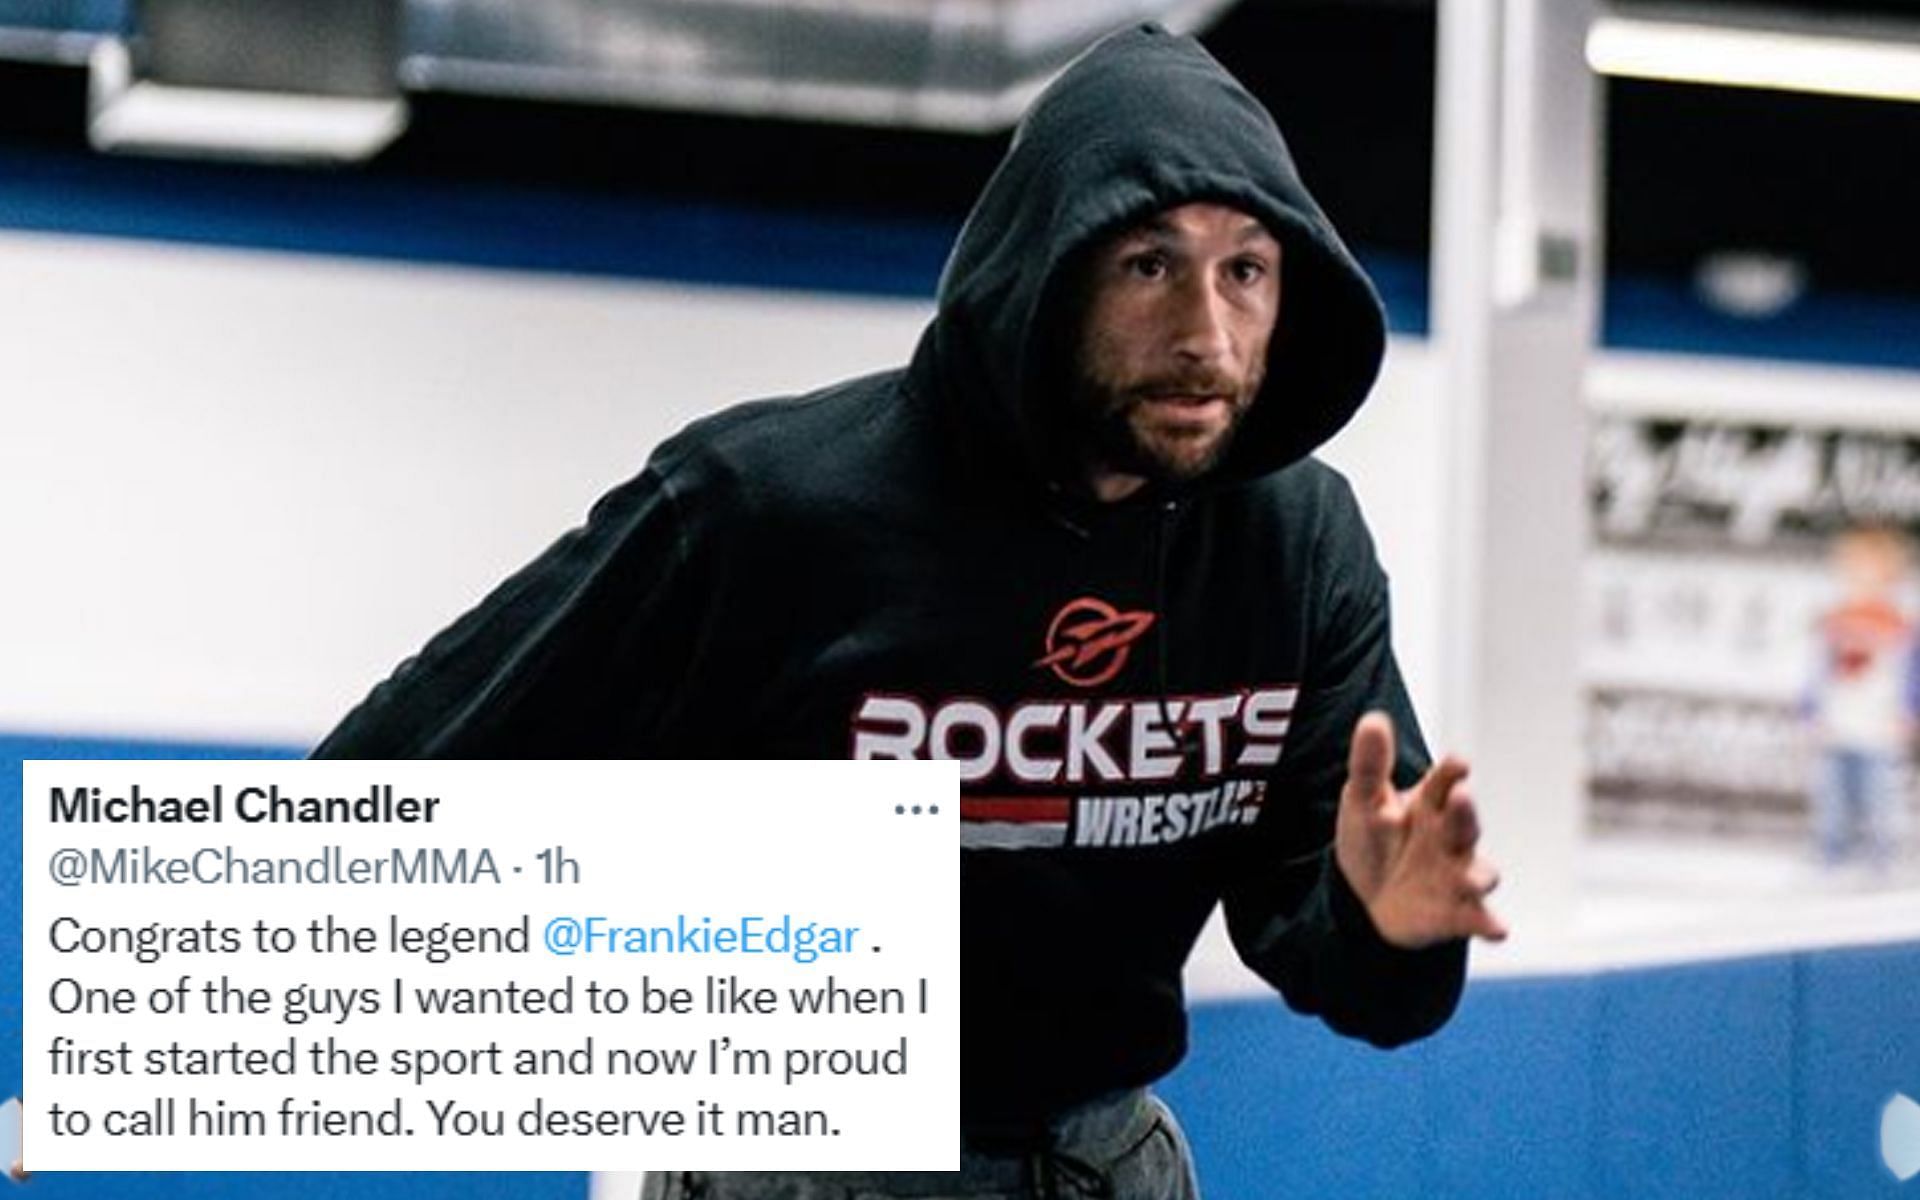 Fellow MMA fighters were happy for Frankie Edgar